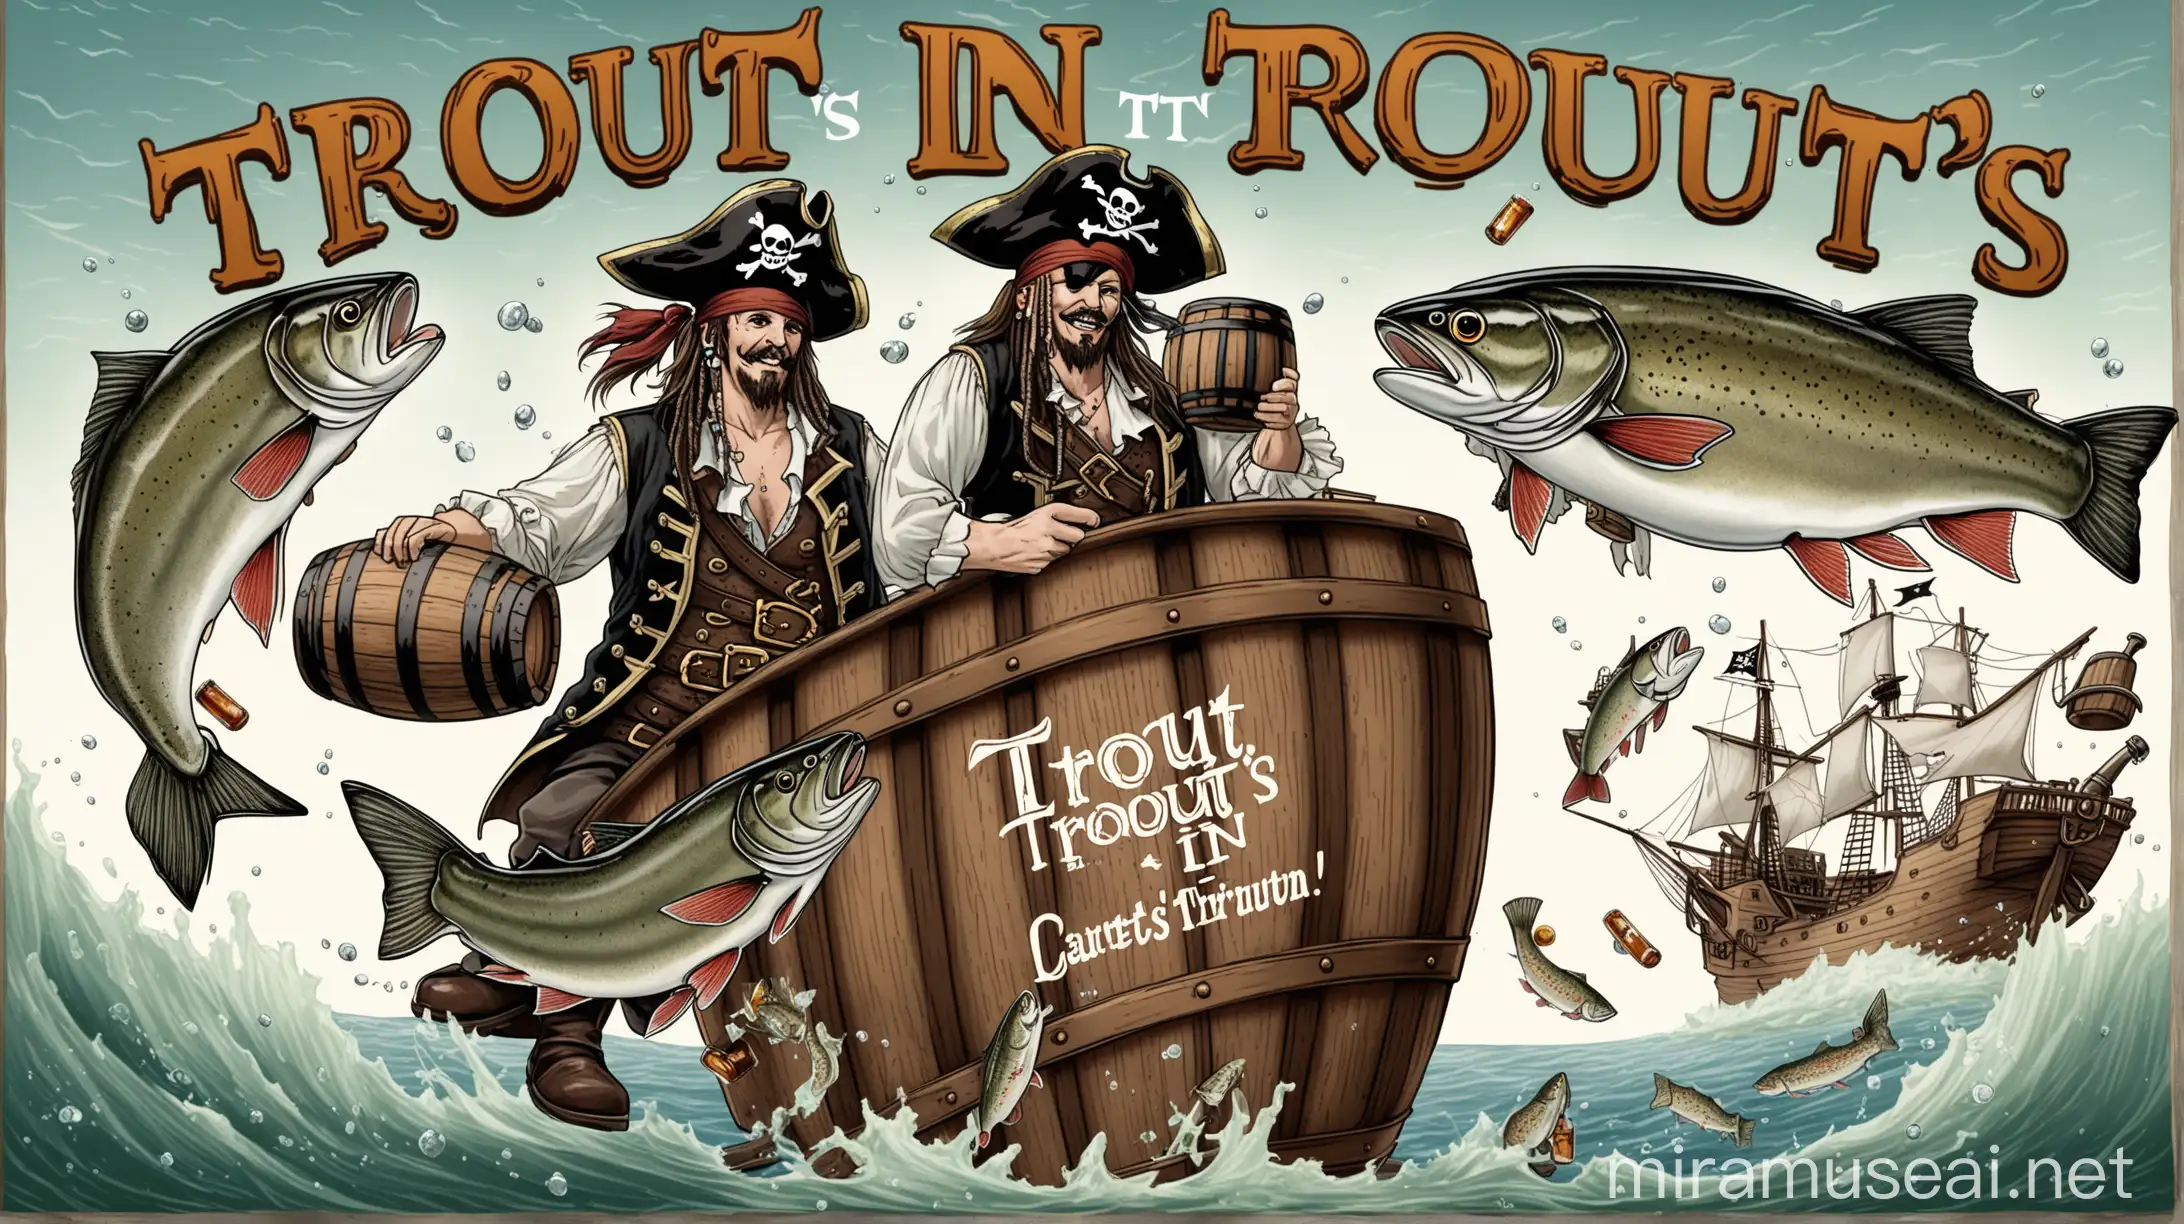 Pirate holding bourbon, ship with barrels falling into ocean, lake trout with the word Trout's in air